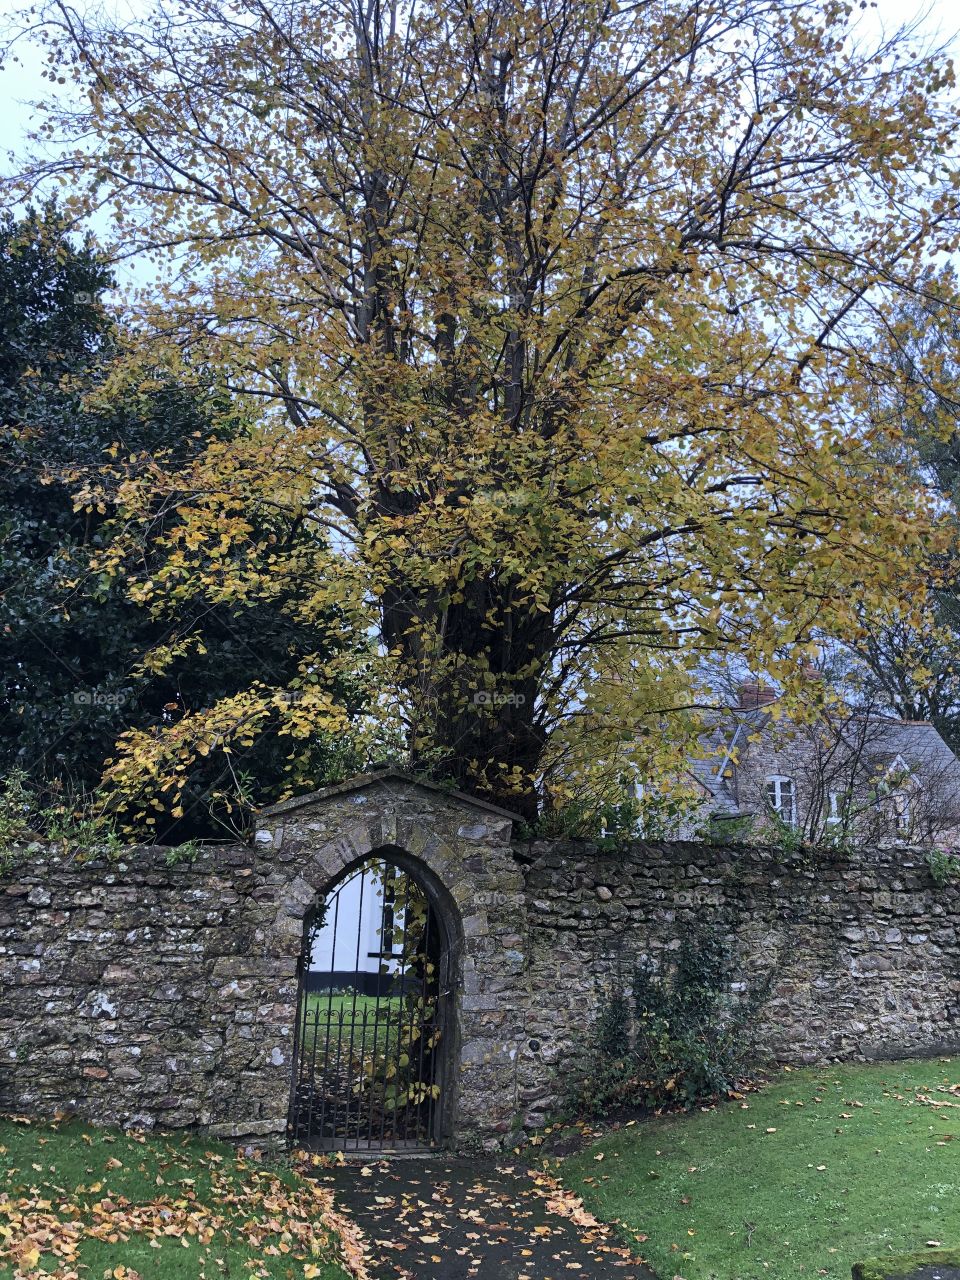 It’s that time of year an autumnal view in central Ottery St Mary in Devon, UK. I am loving too the little archway.